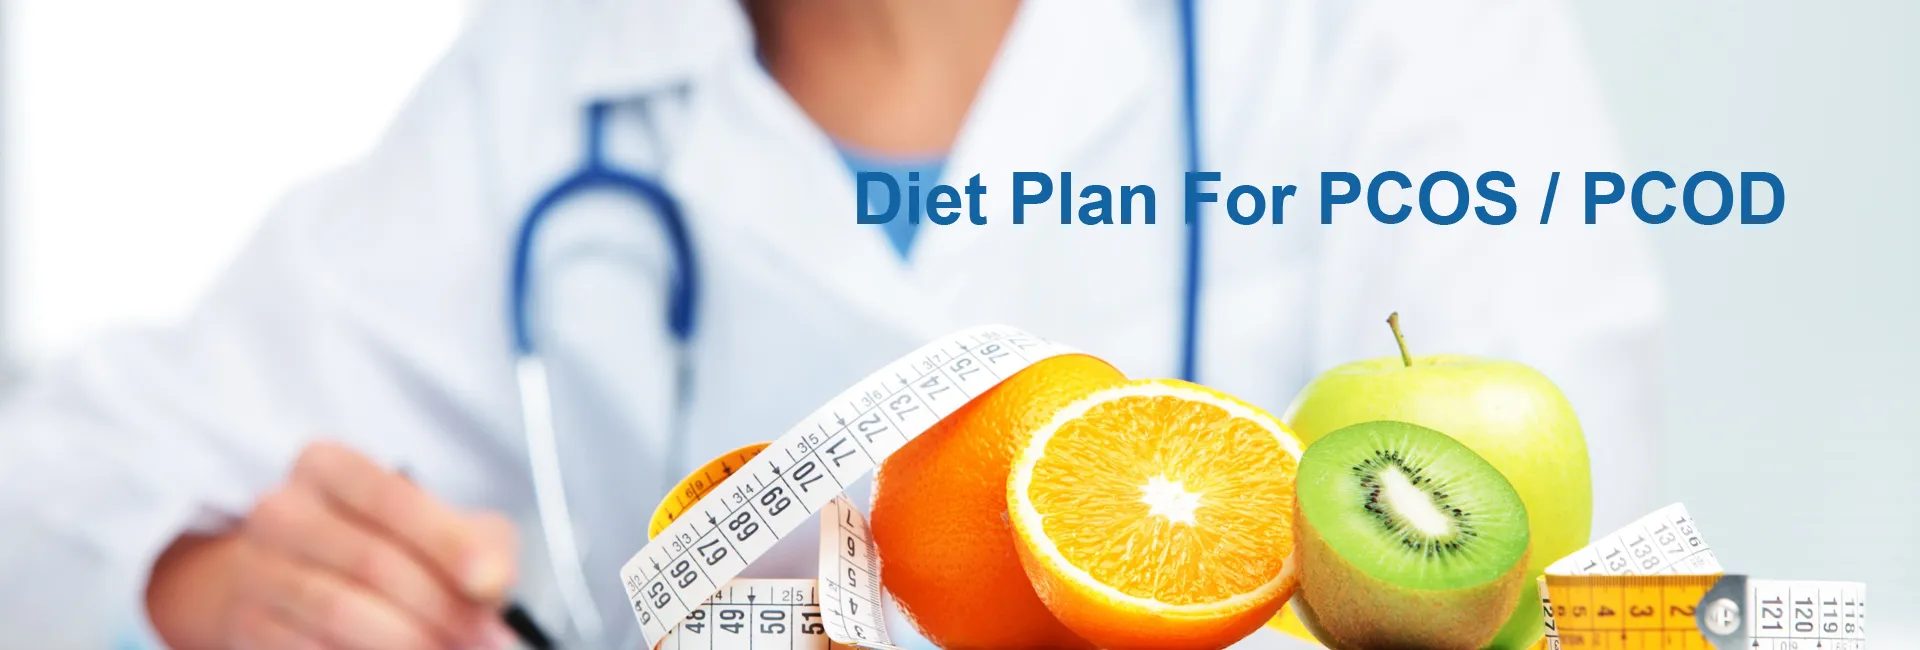 Diet Plan For PCOS / PCOD